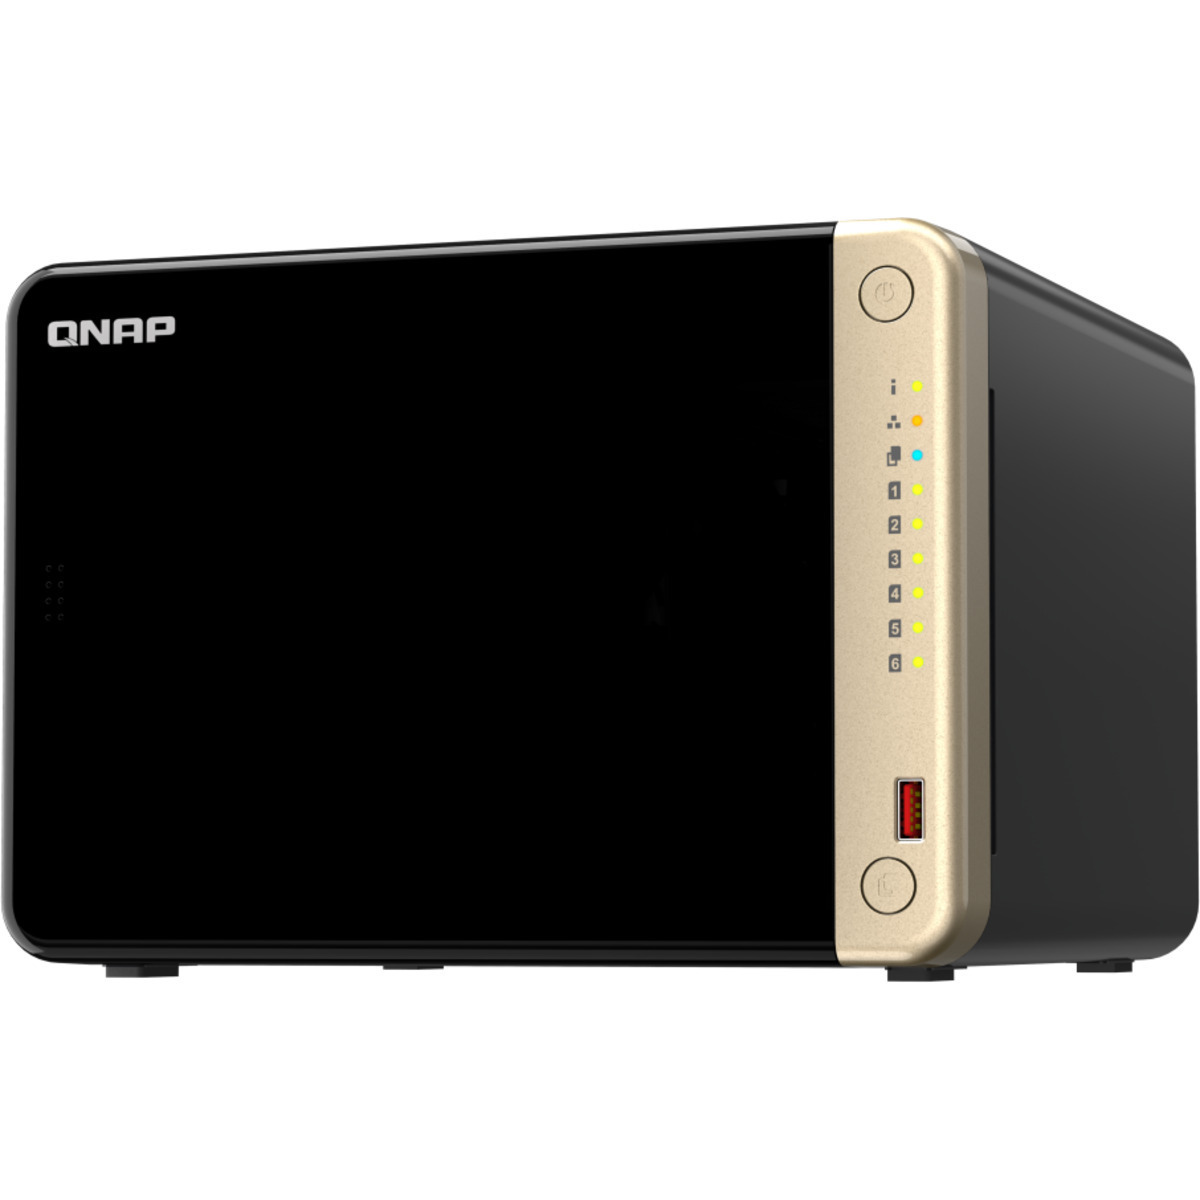 QNAP TS-664 60tb 6-Bay Desktop Multimedia / Power User / Business NAS - Network Attached Storage Device 5x12tb Western Digital Red Pro WD121KFBX 3.5 7200rpm SATA 6Gb/s HDD NAS Class Drives Installed - Burn-In Tested TS-664